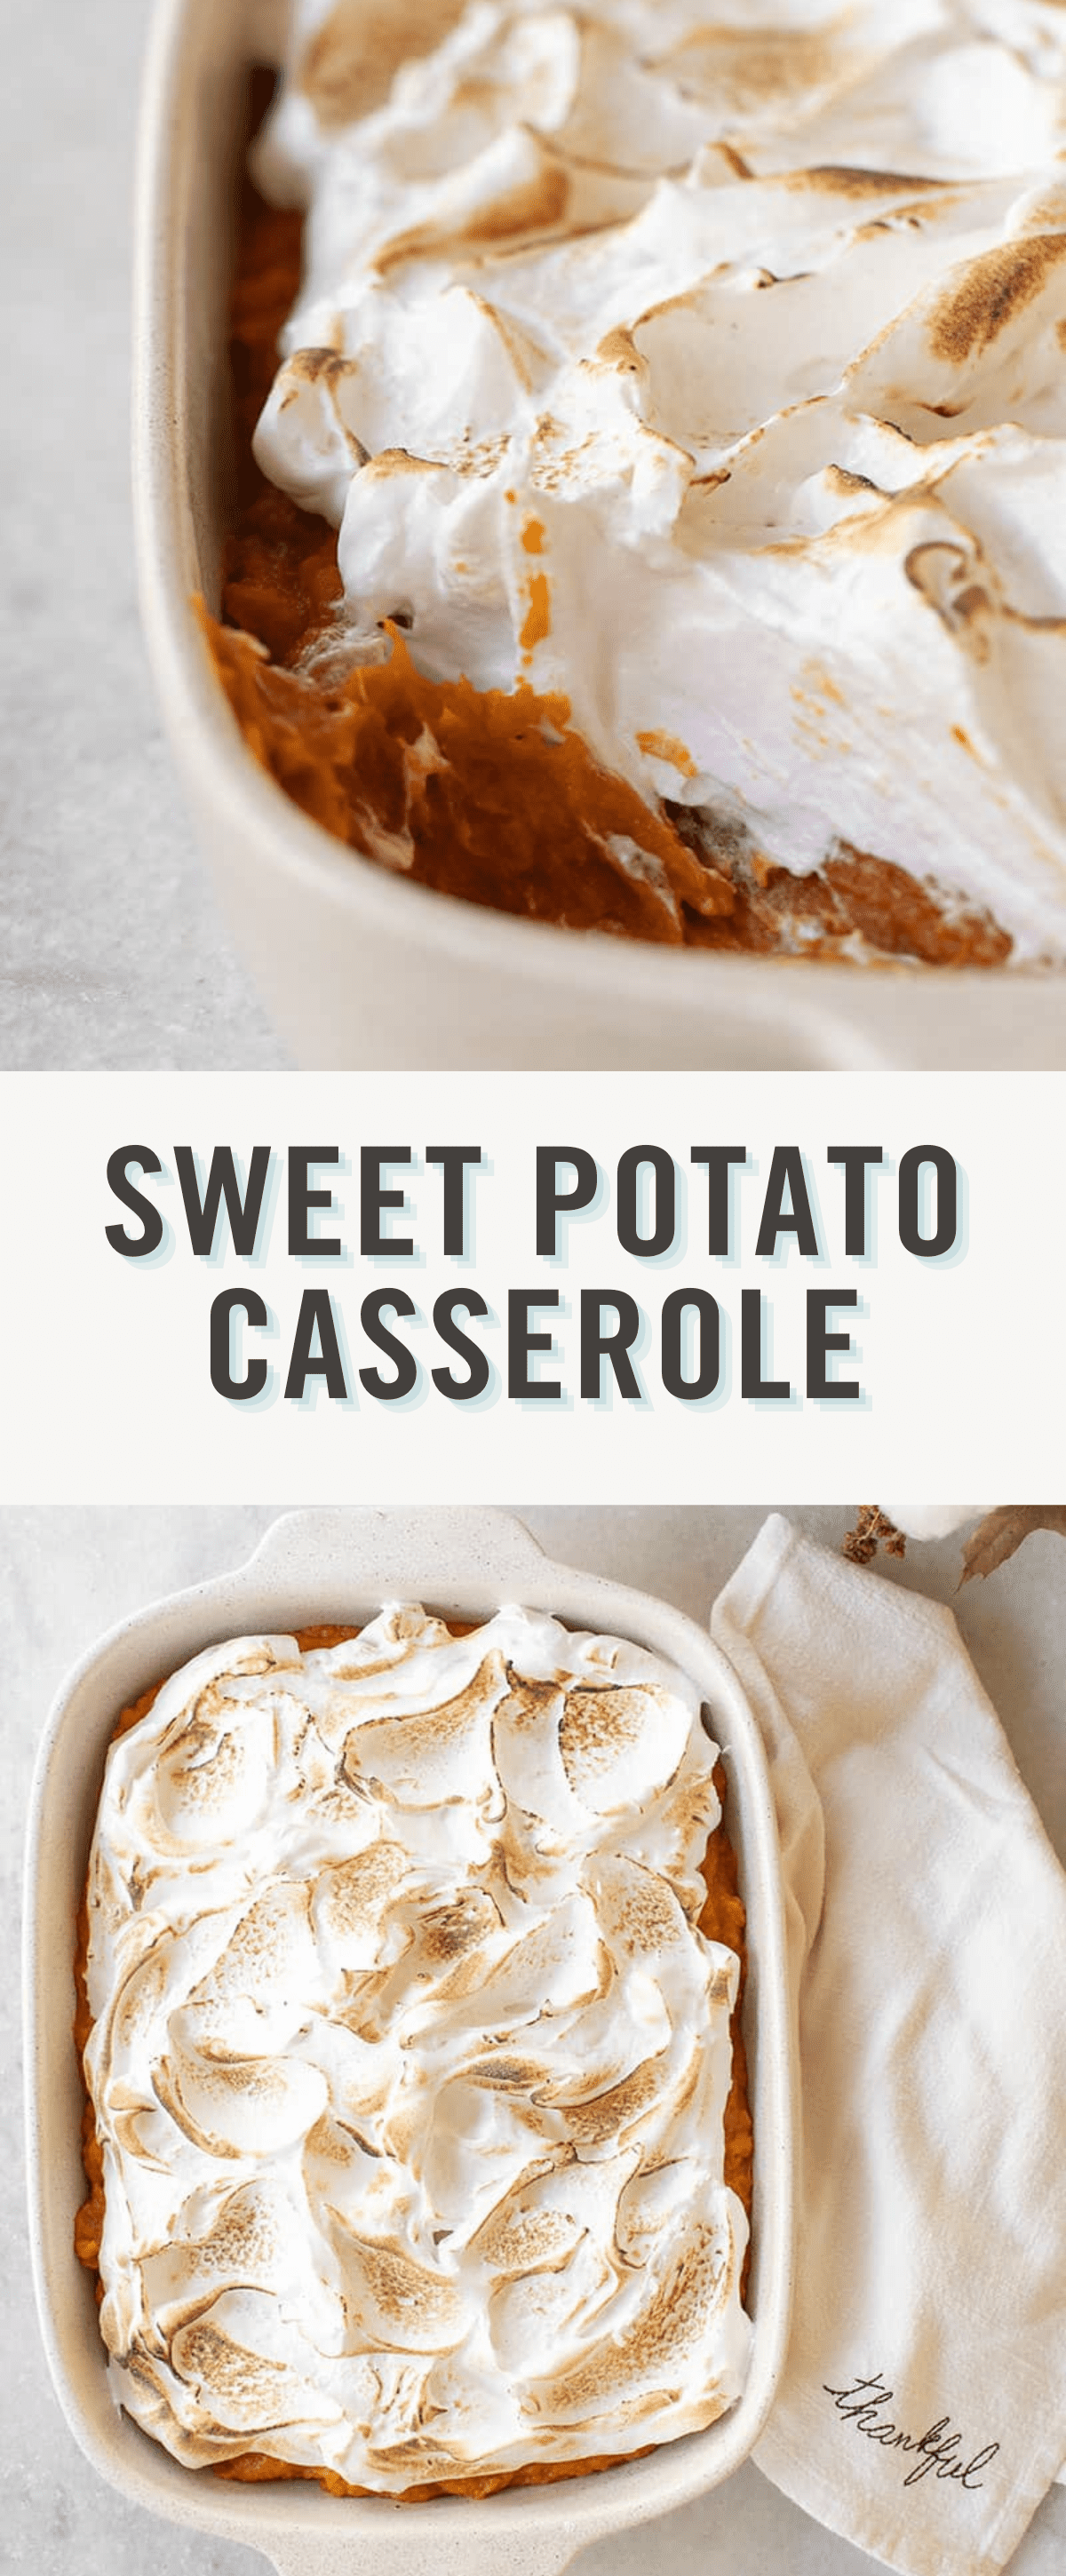 sweet potato casserole picture with title.